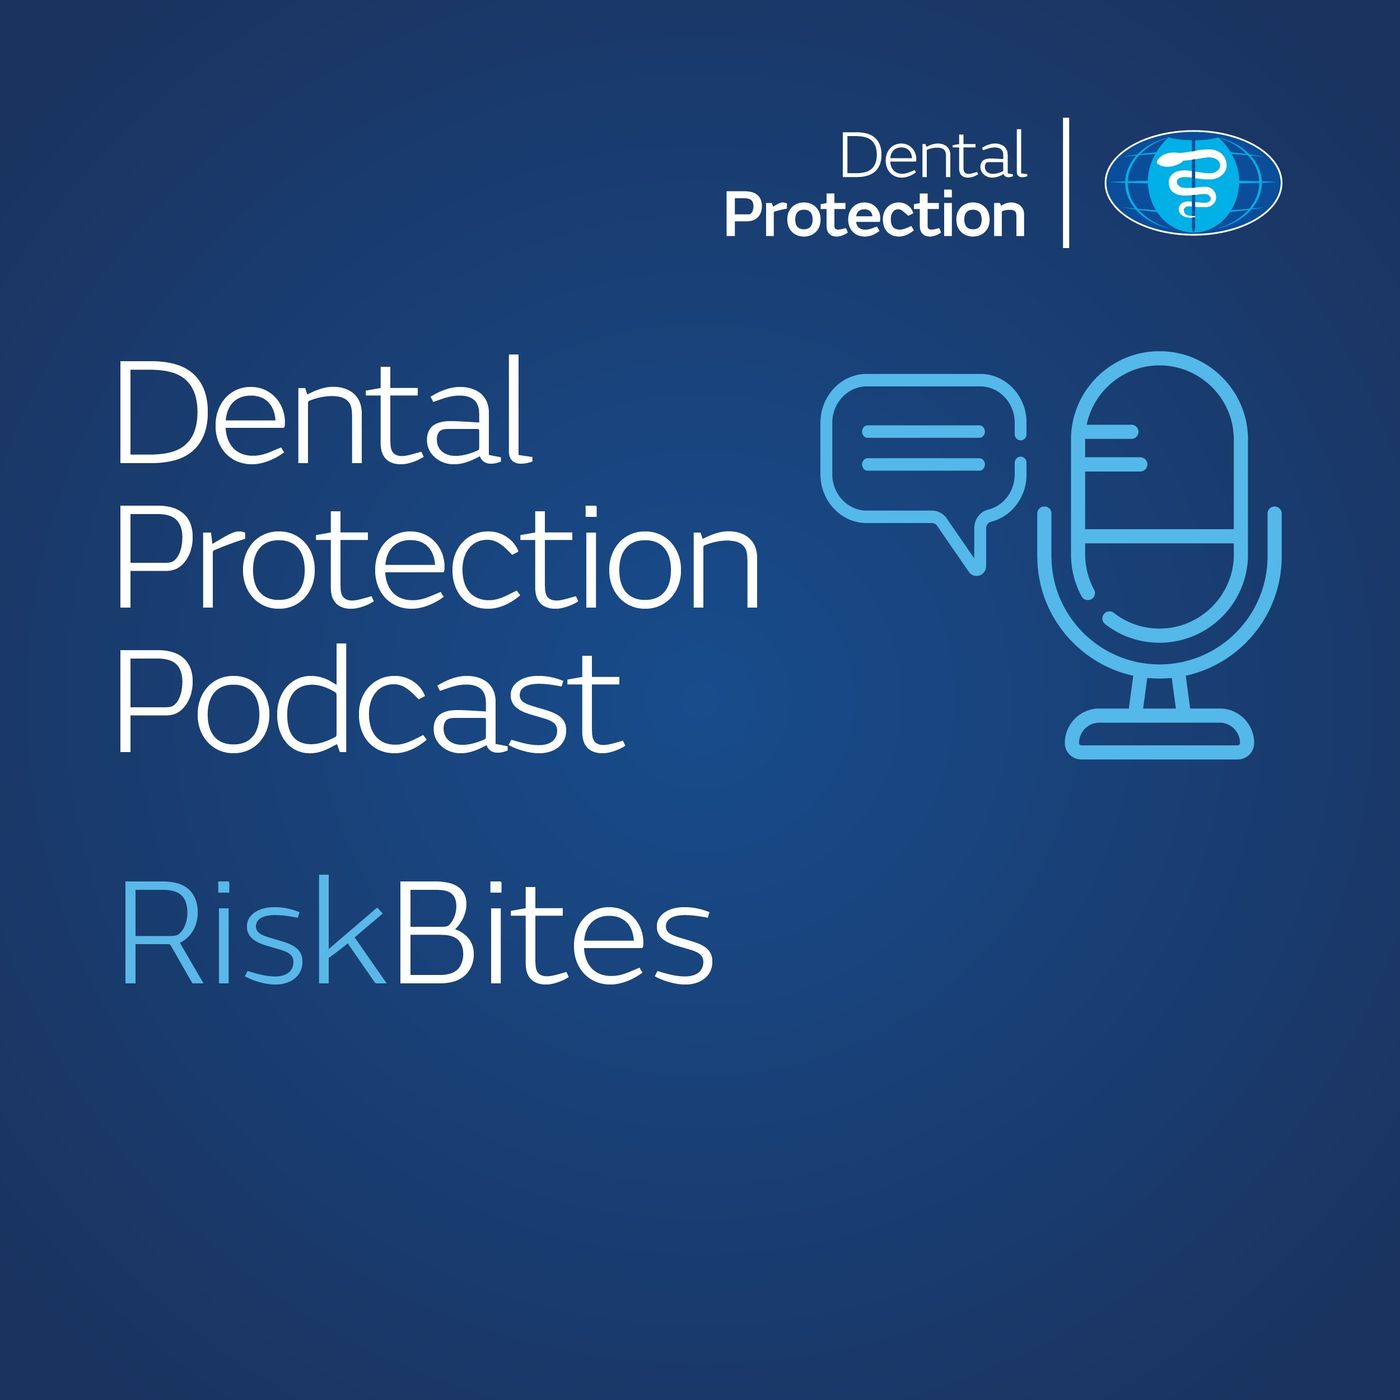 Risk Bites: Confidentiality in dentistry